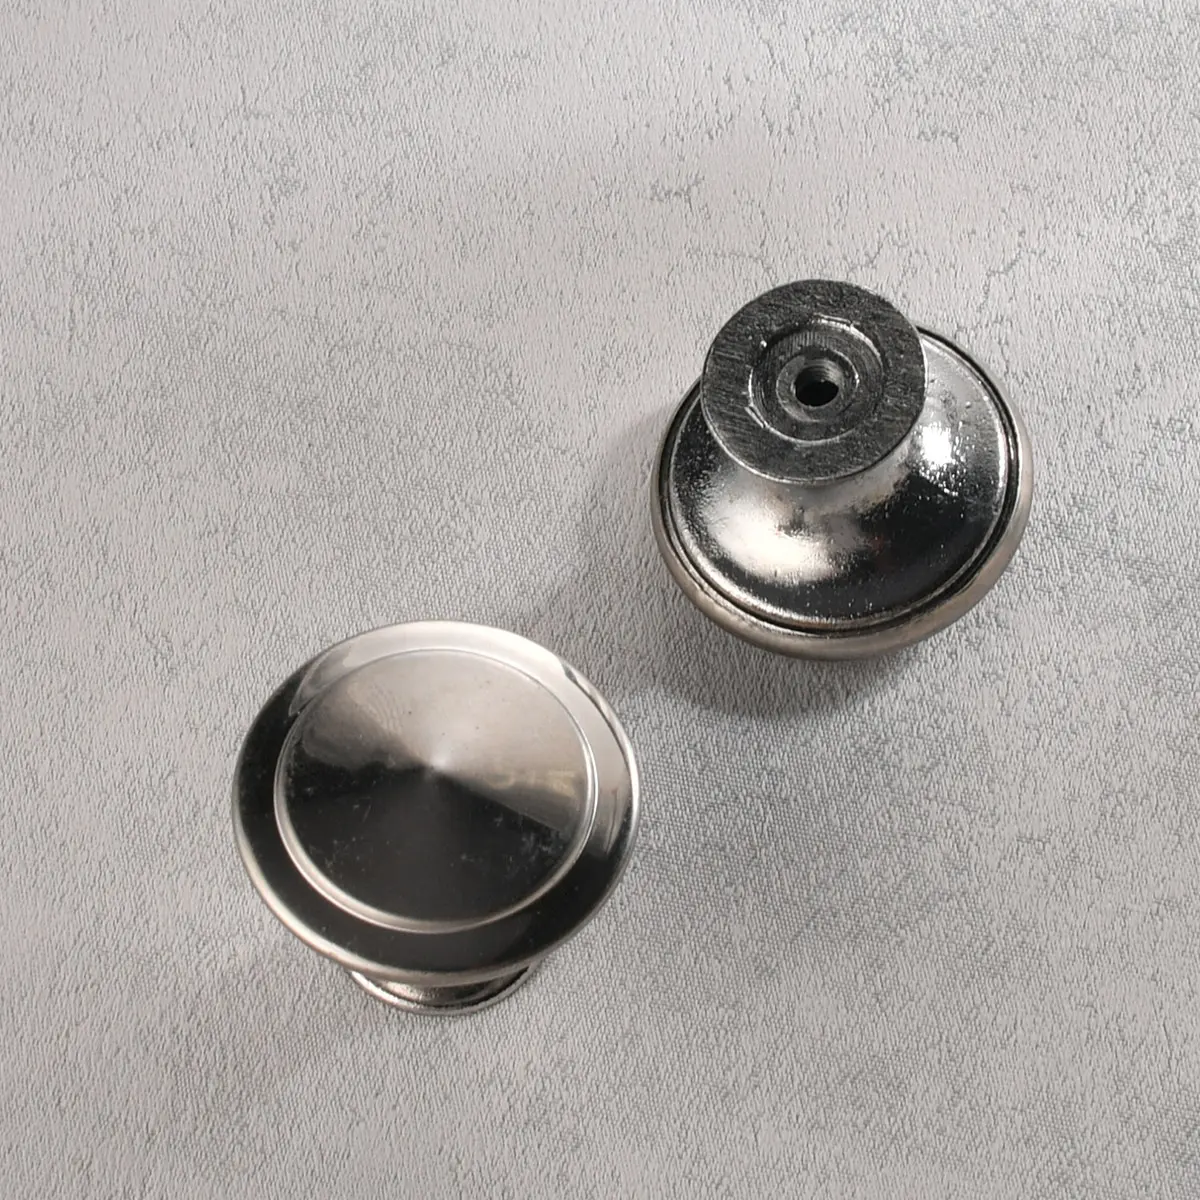 Stainless steel modern simple European metal silver round single-hole handle, used for drawers, cabinets, doors furniture handle